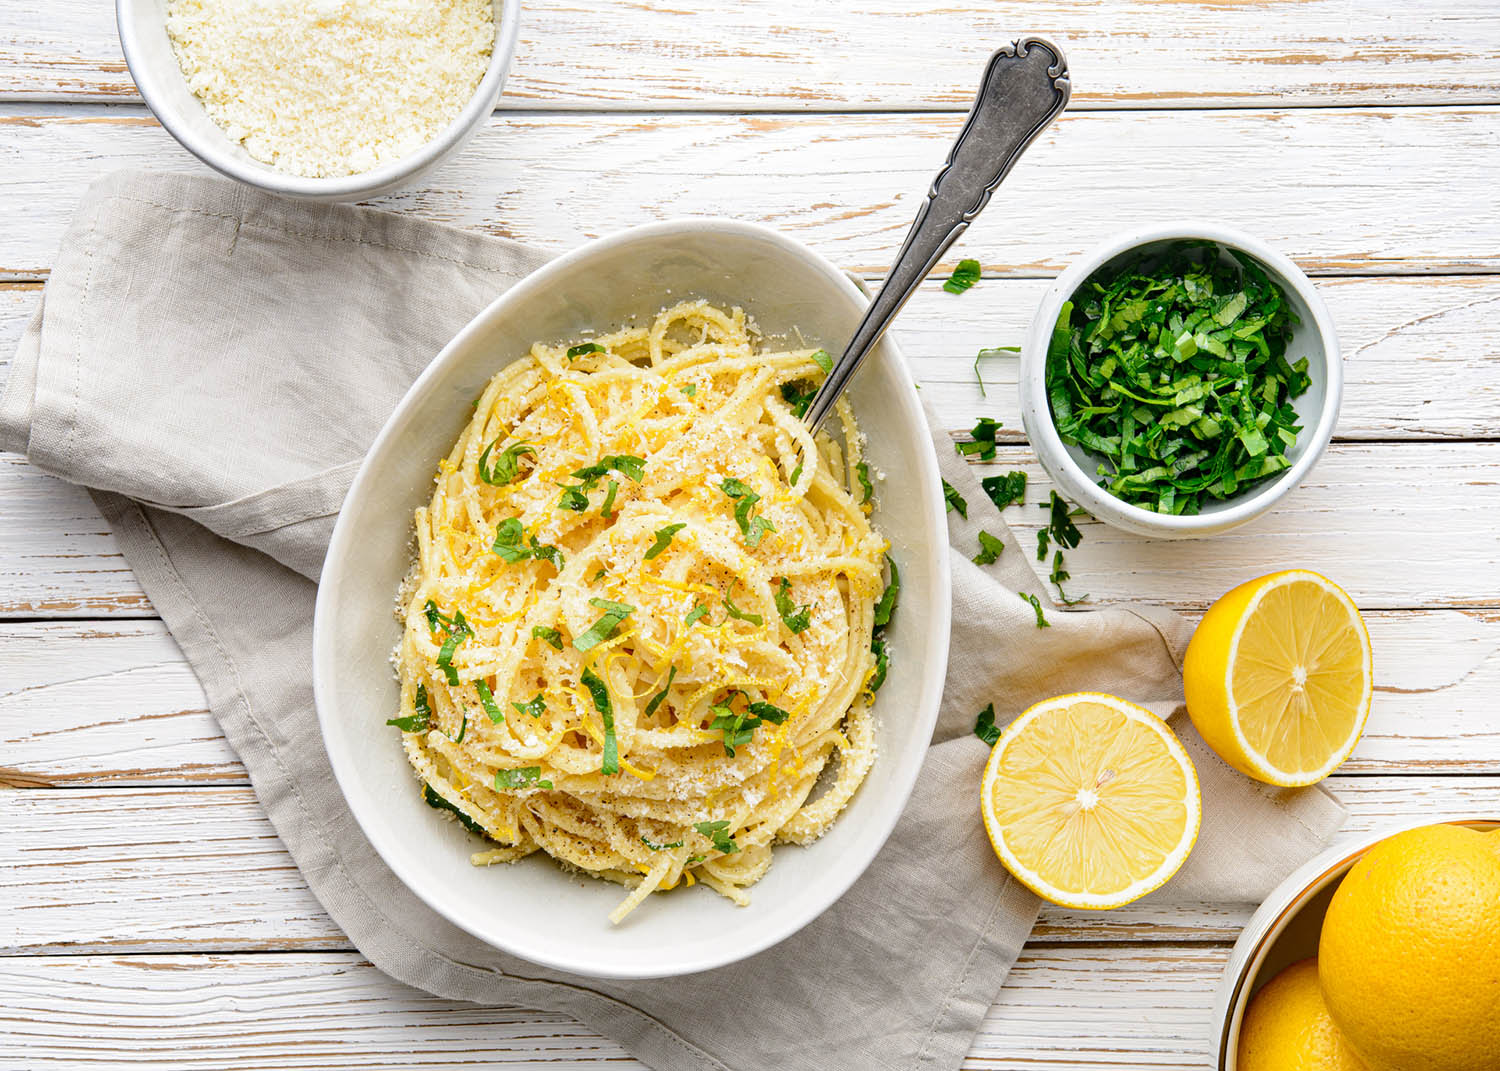 Pasta al Limone, delicious Italian meal, spaghetti with Parmesan, butter and lemon sauce, topped with fresh grated zest and cheese on rustic wooden background